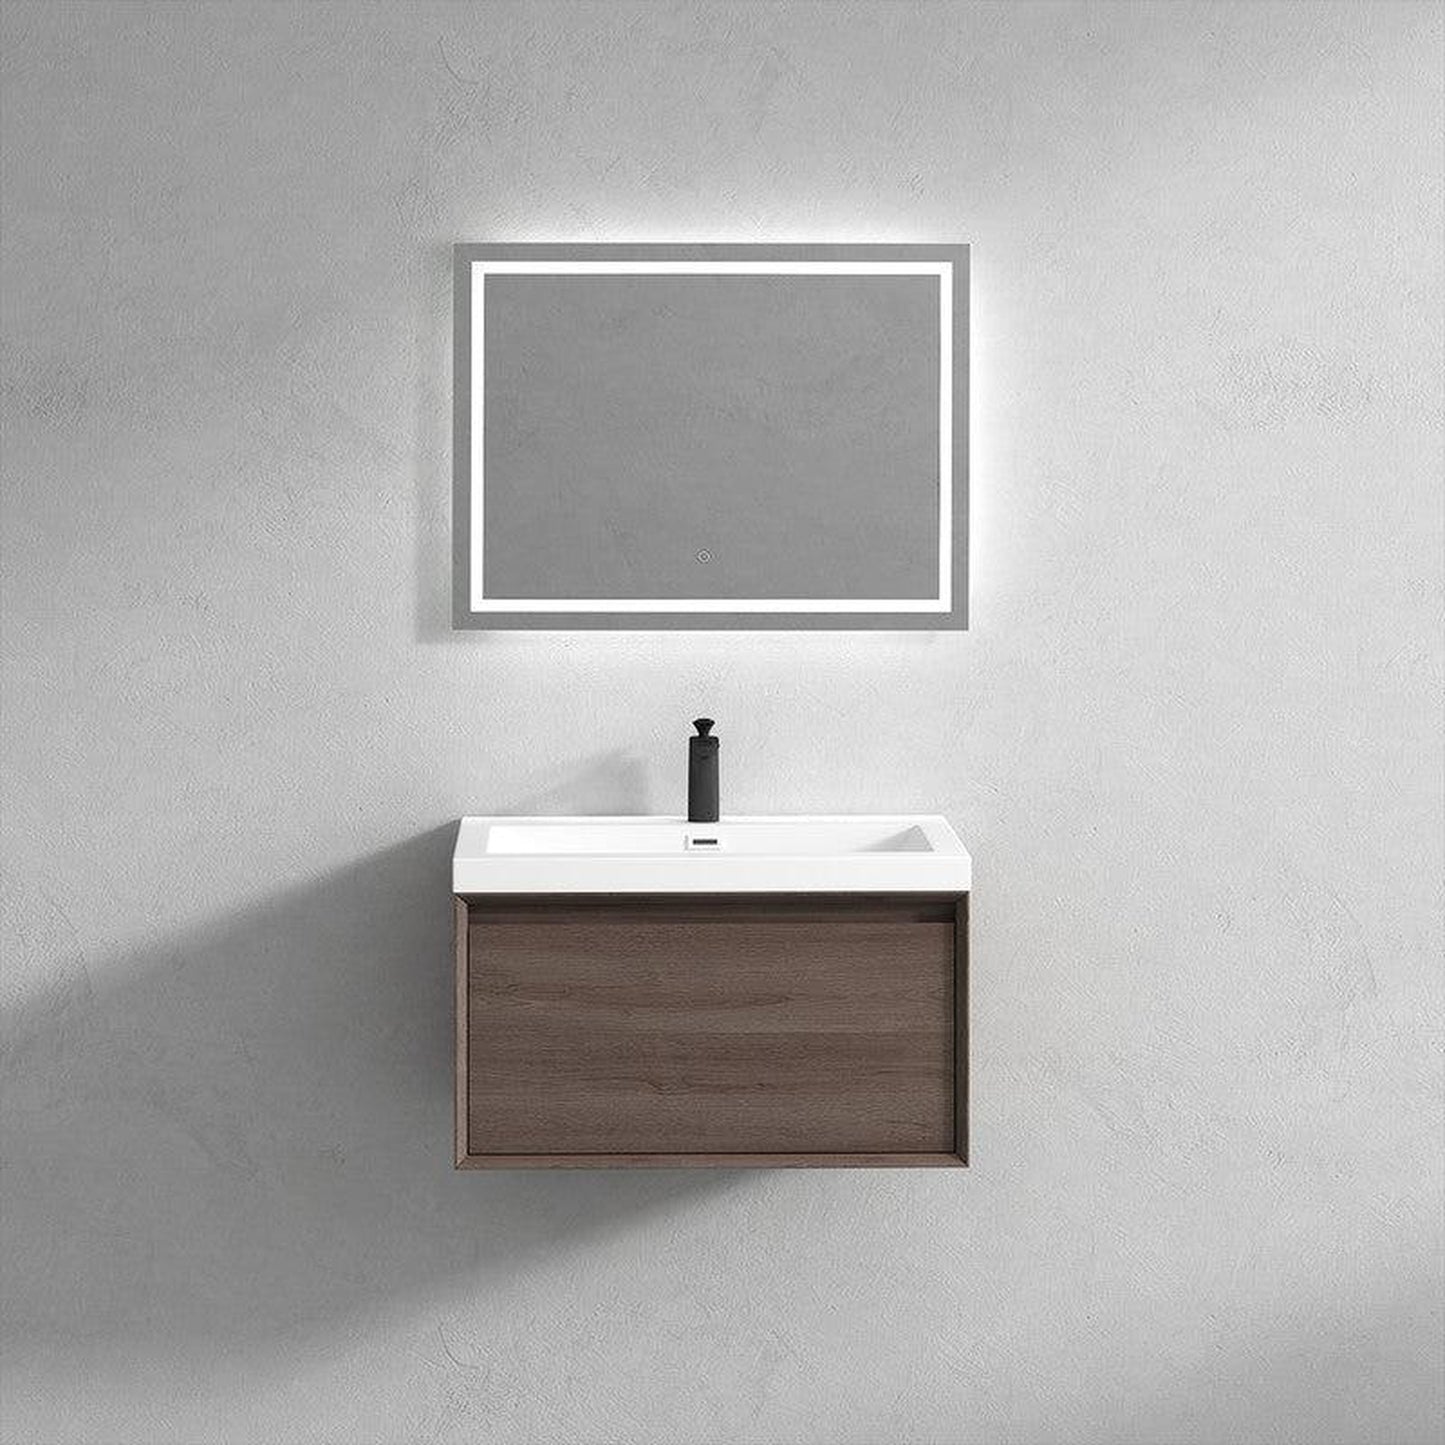 Moreno Bath BELLA 30" Red Oak Wall-Mounted Vanity With Single Reinforced White Acrylic Sink